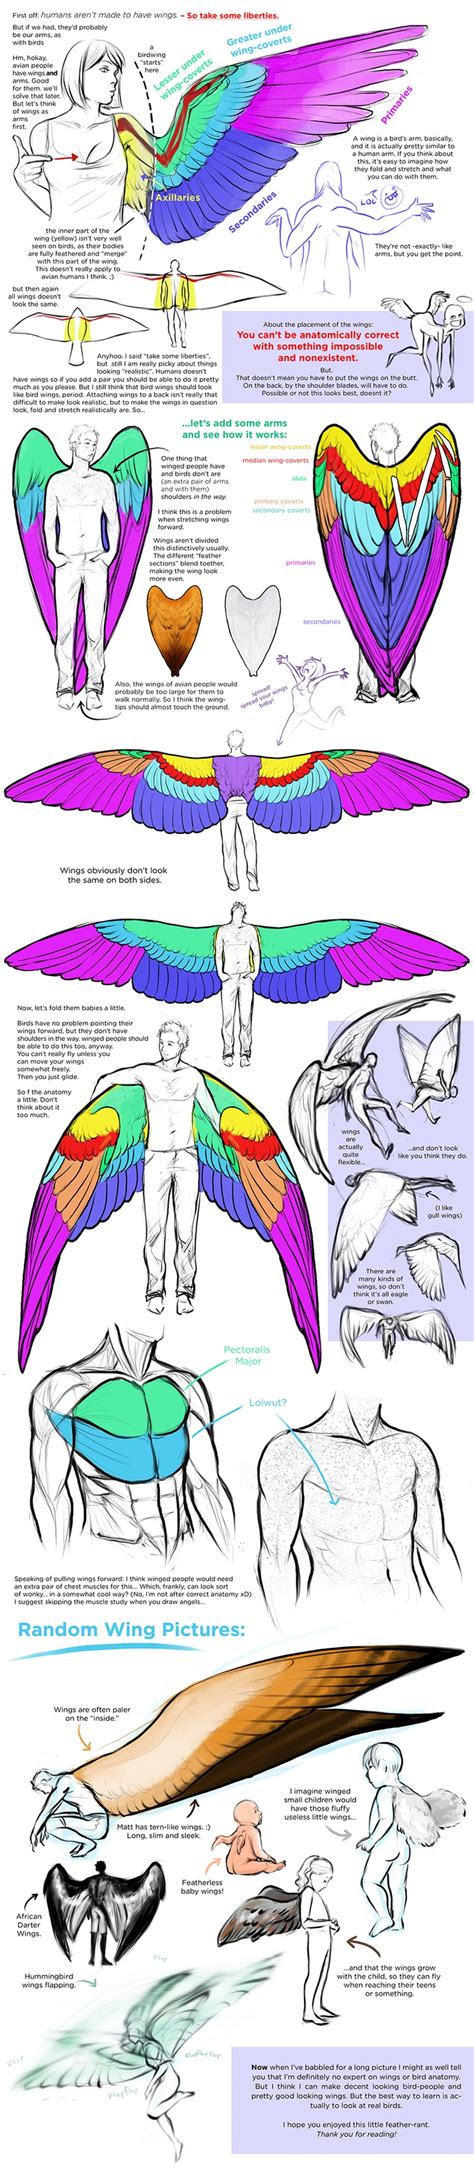 Comic Art Reference Winged People